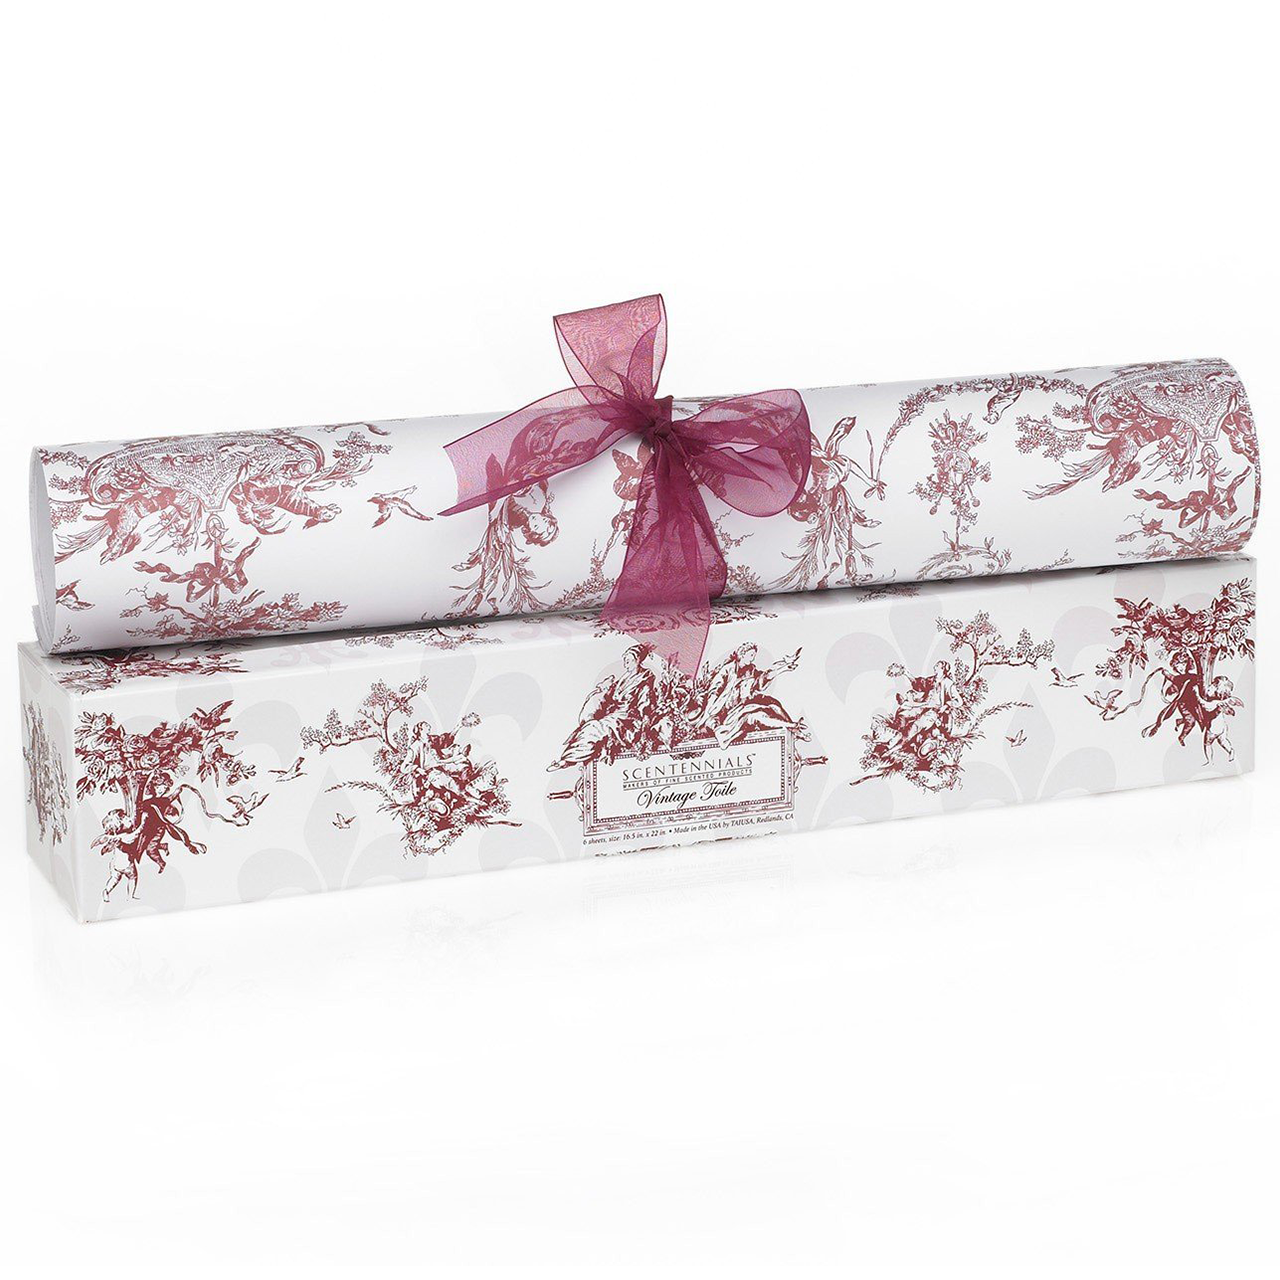 Scentennial Vintage Toile Red Scented Drawer Liners | James Anthony  Collection